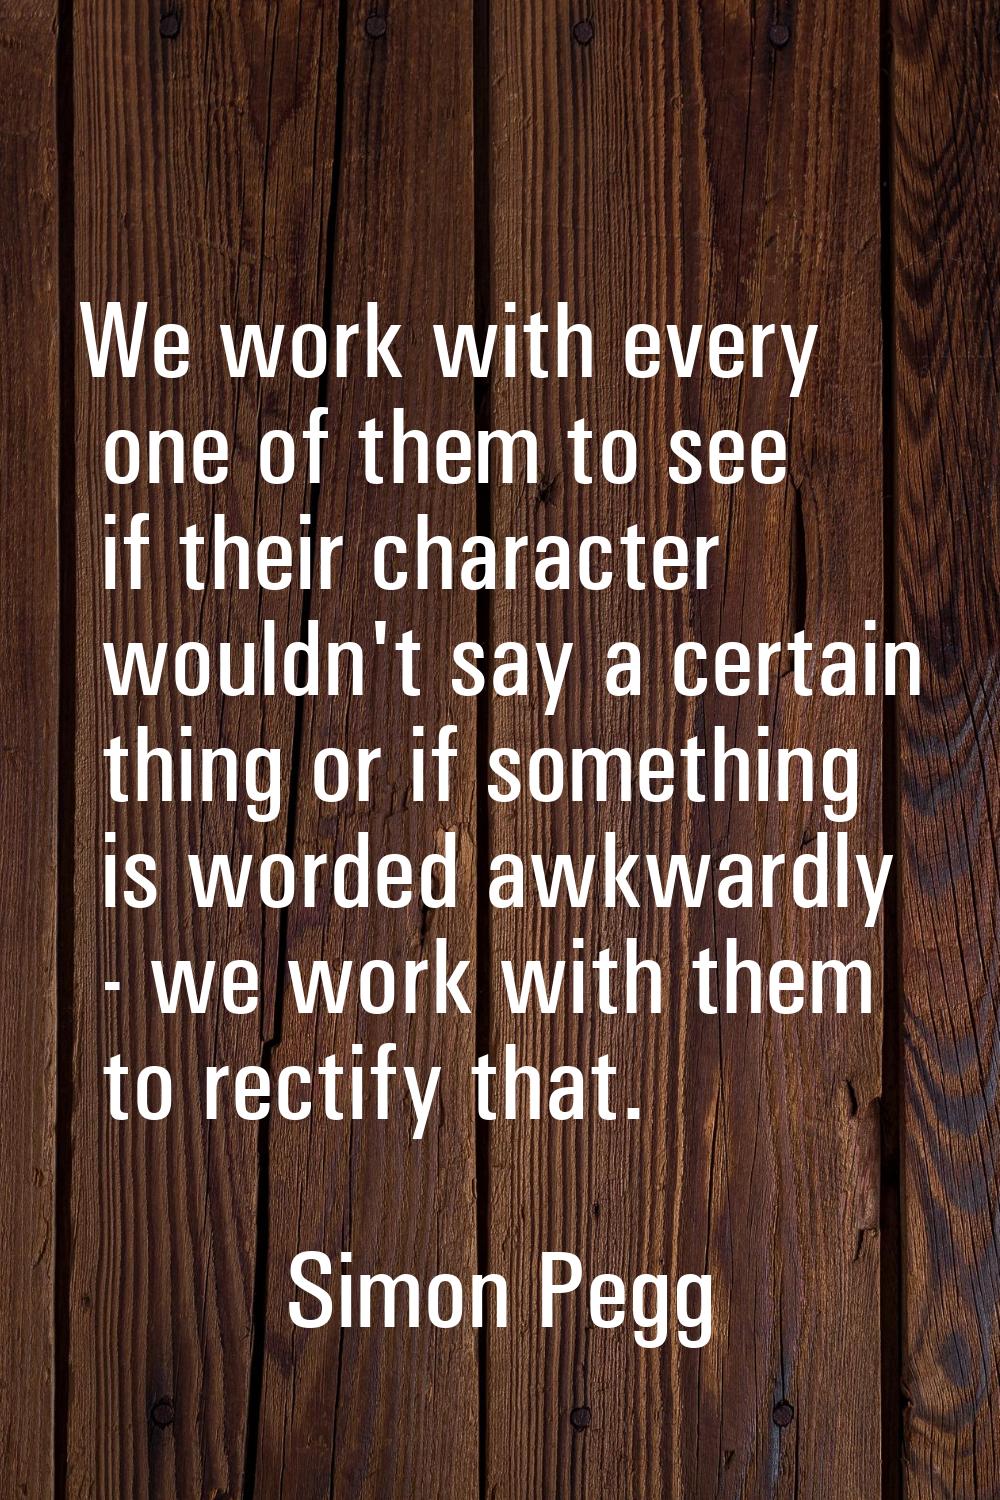 We work with every one of them to see if their character wouldn't say a certain thing or if somethi